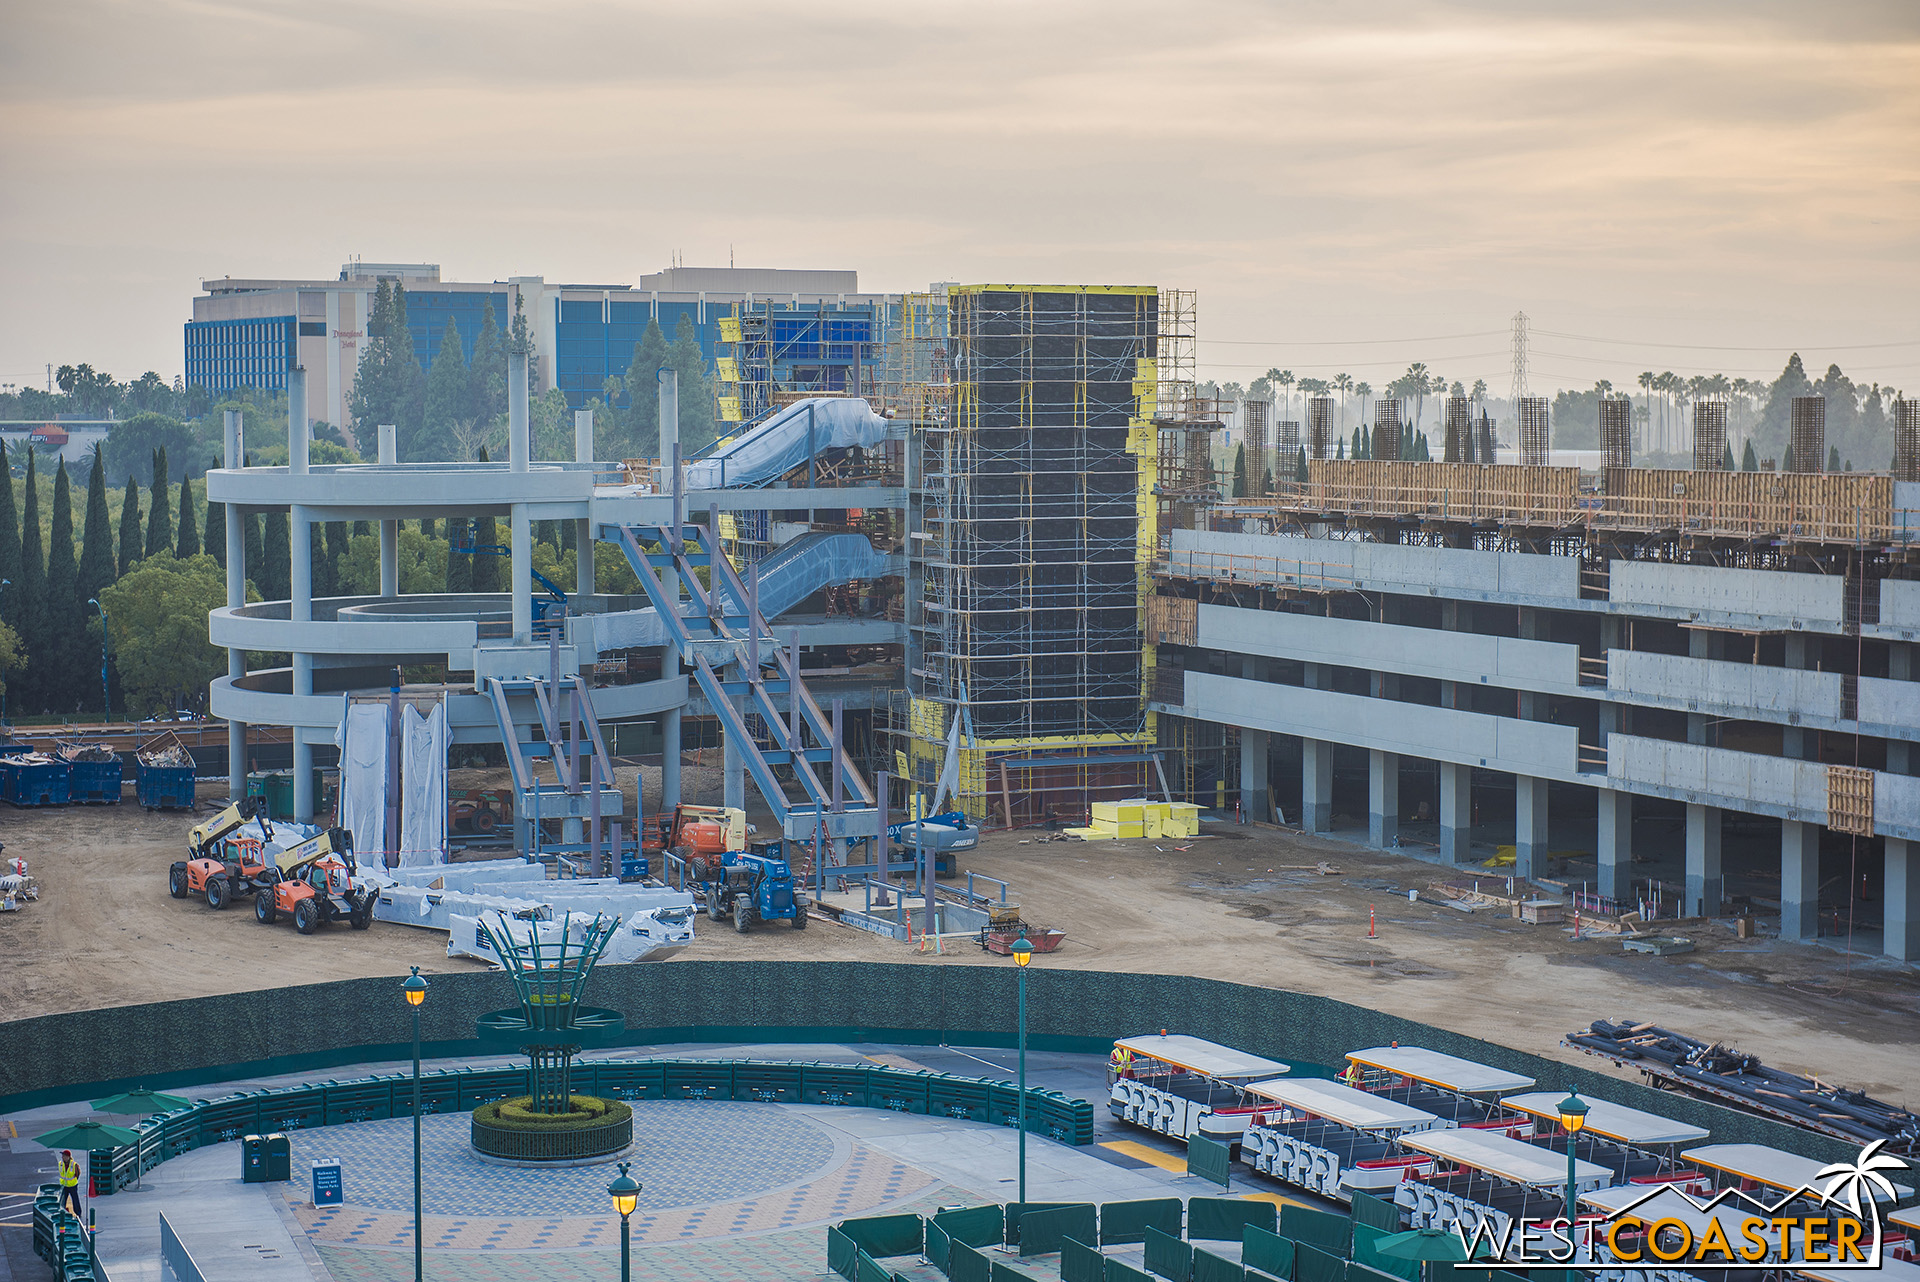  The Mickey and Friends expansion is coming along nicely, with the escalator promenade at the far end really starting to take shape as it nears topping off. 